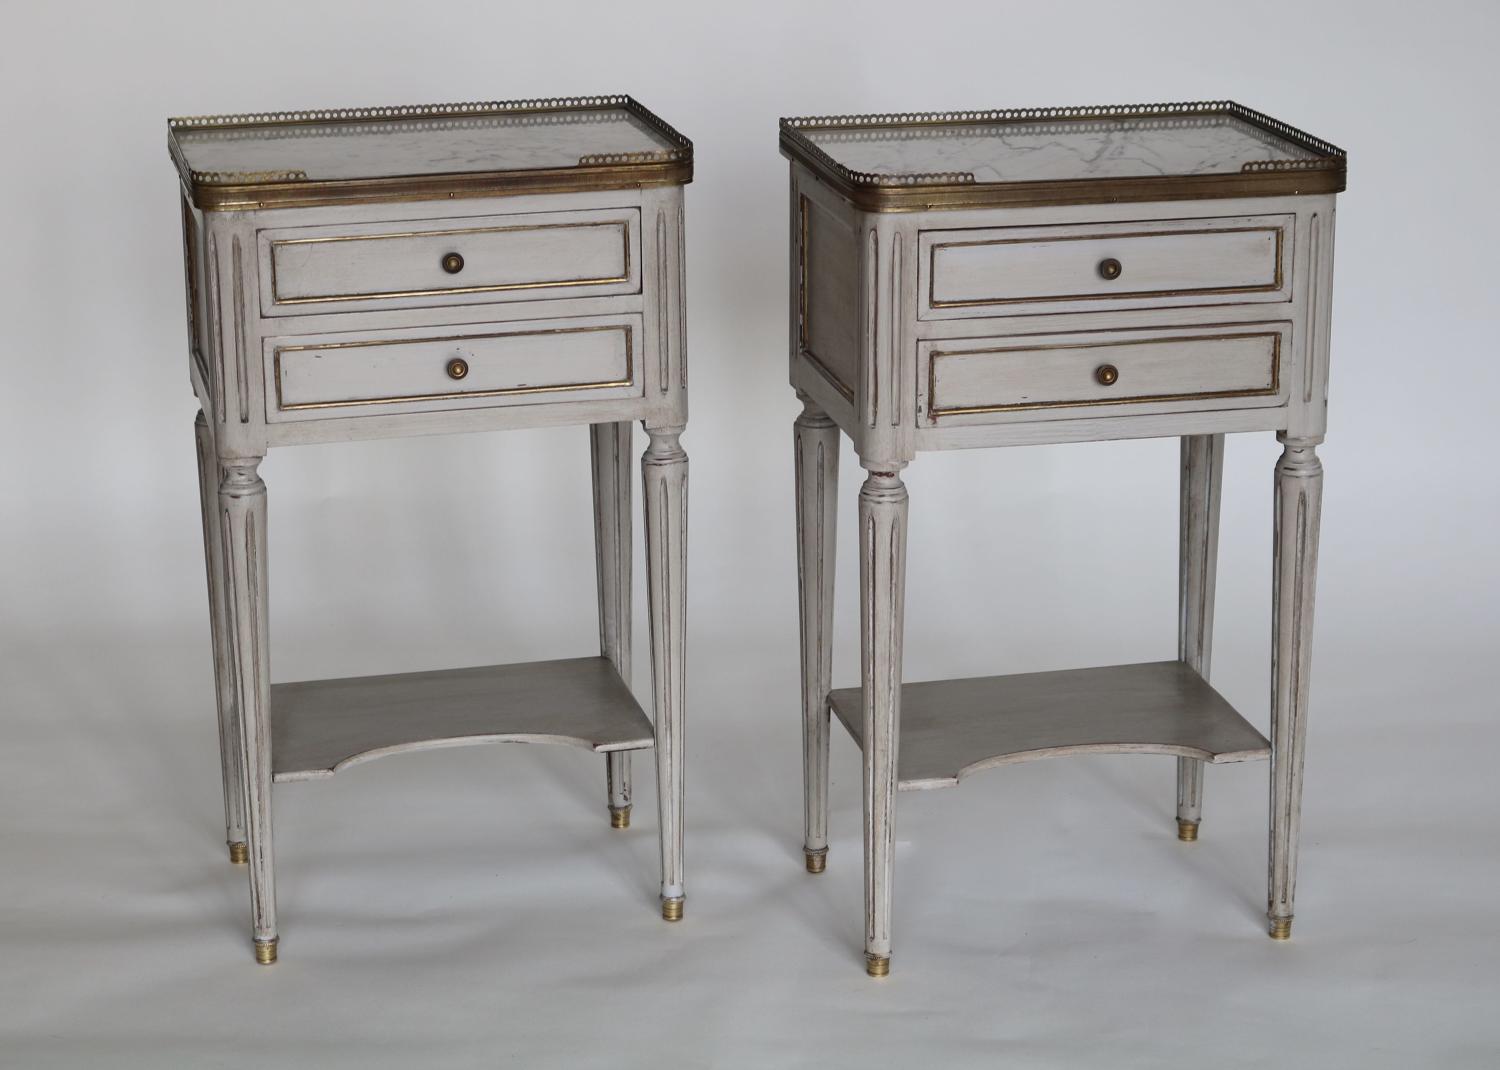 Pair of galleried bedside tables